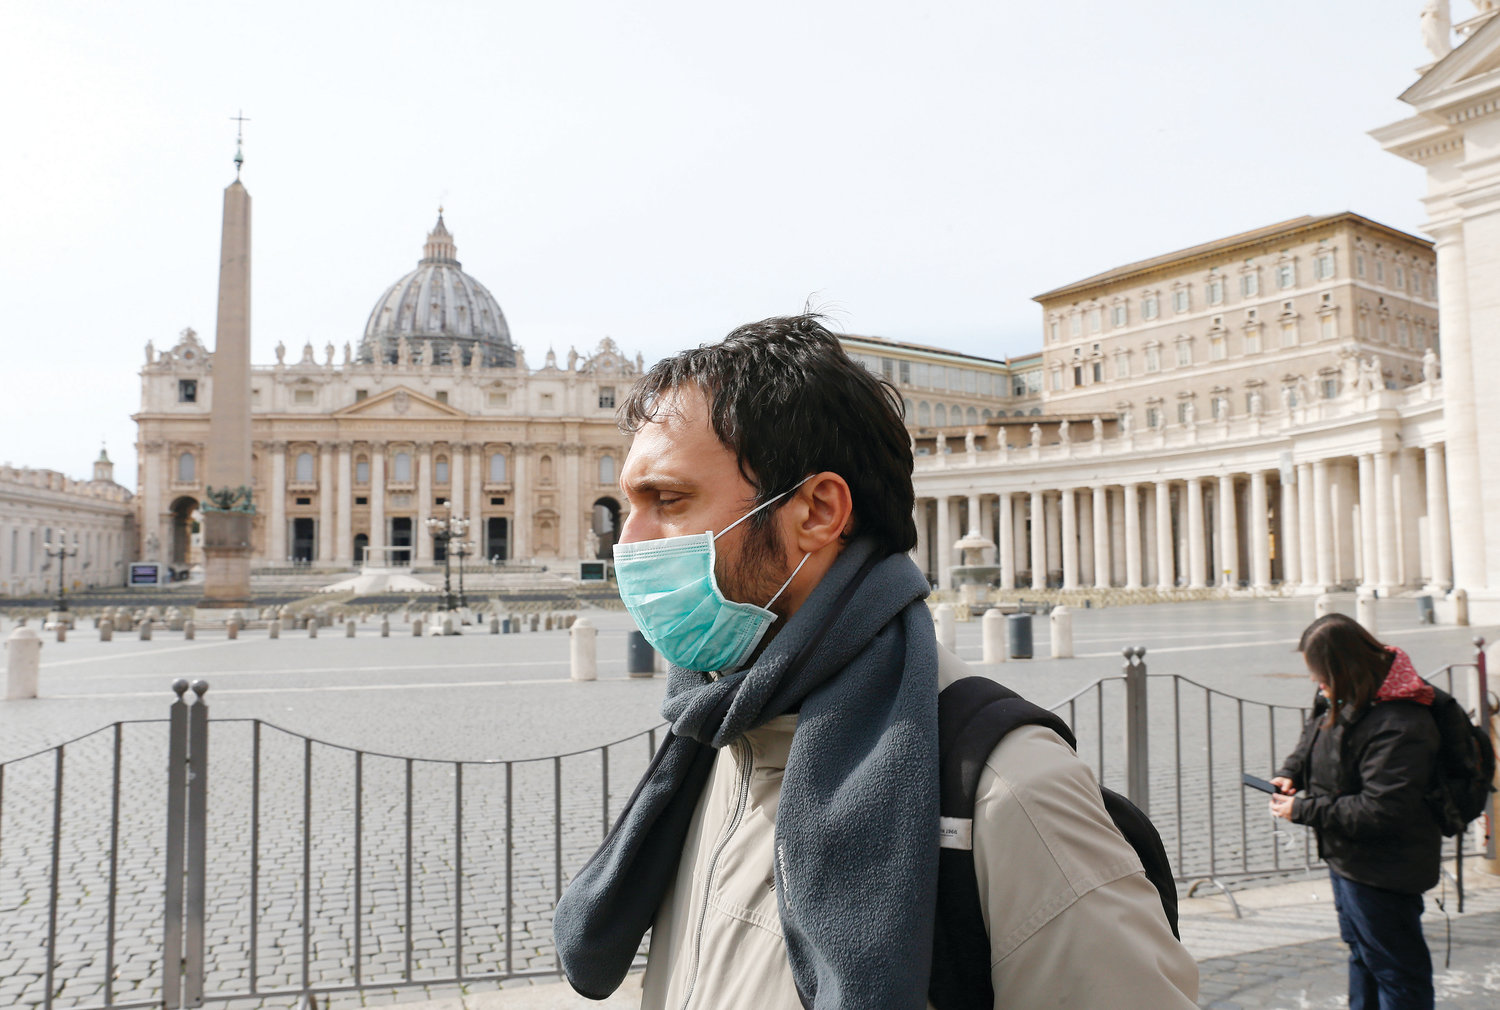 A man wearing a mask for protection from the coronavirus passes an empty St. Peter’s Square at the Vatican March 10, 2020. The Vatican has closed St. Peter’s Square and Basilica to tourists March 10 through April 3 in cooperation with Italian emergency procedures aimed at preventing the spread of the coronavirus.